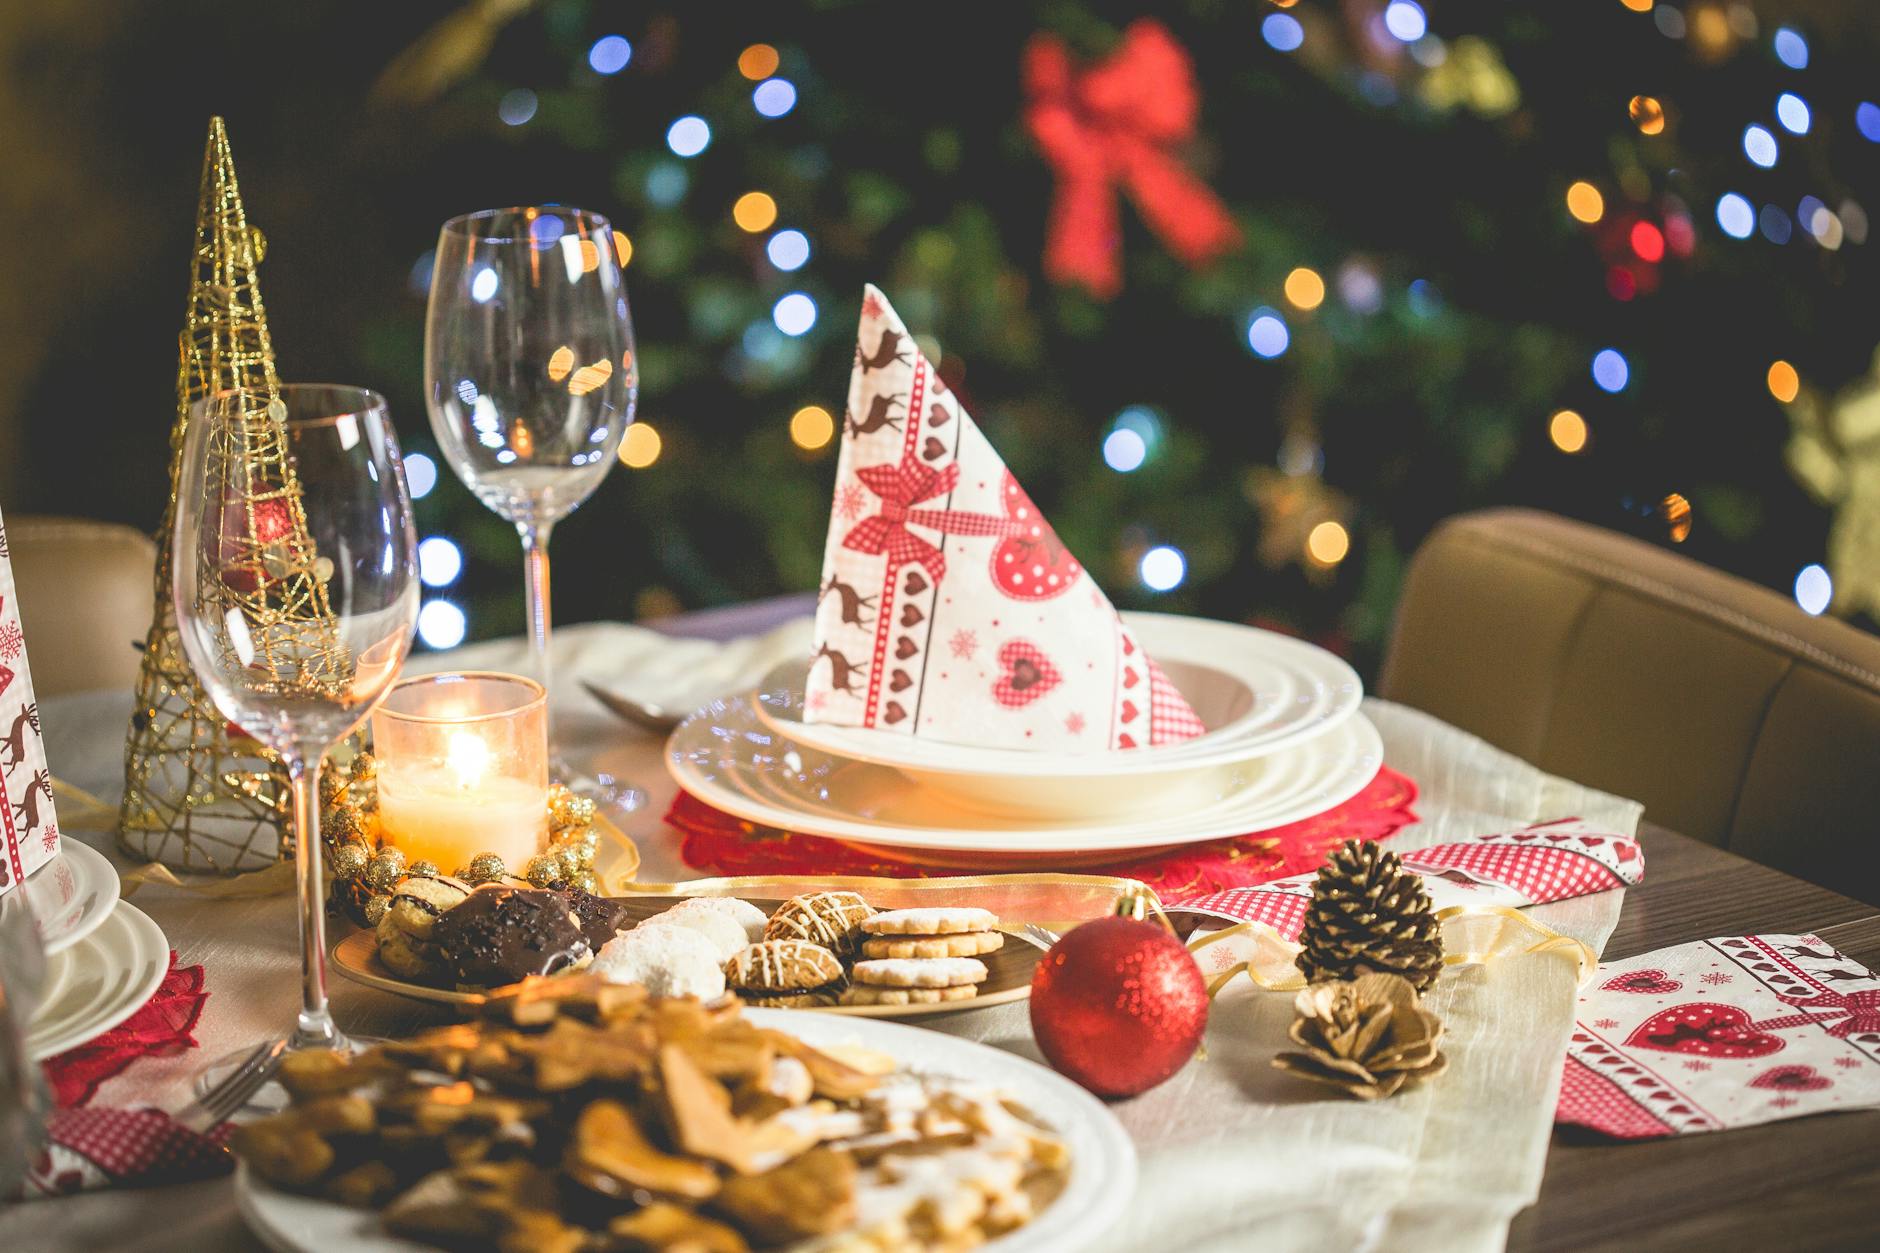 Prepare a special dinner for the family on Christmas 